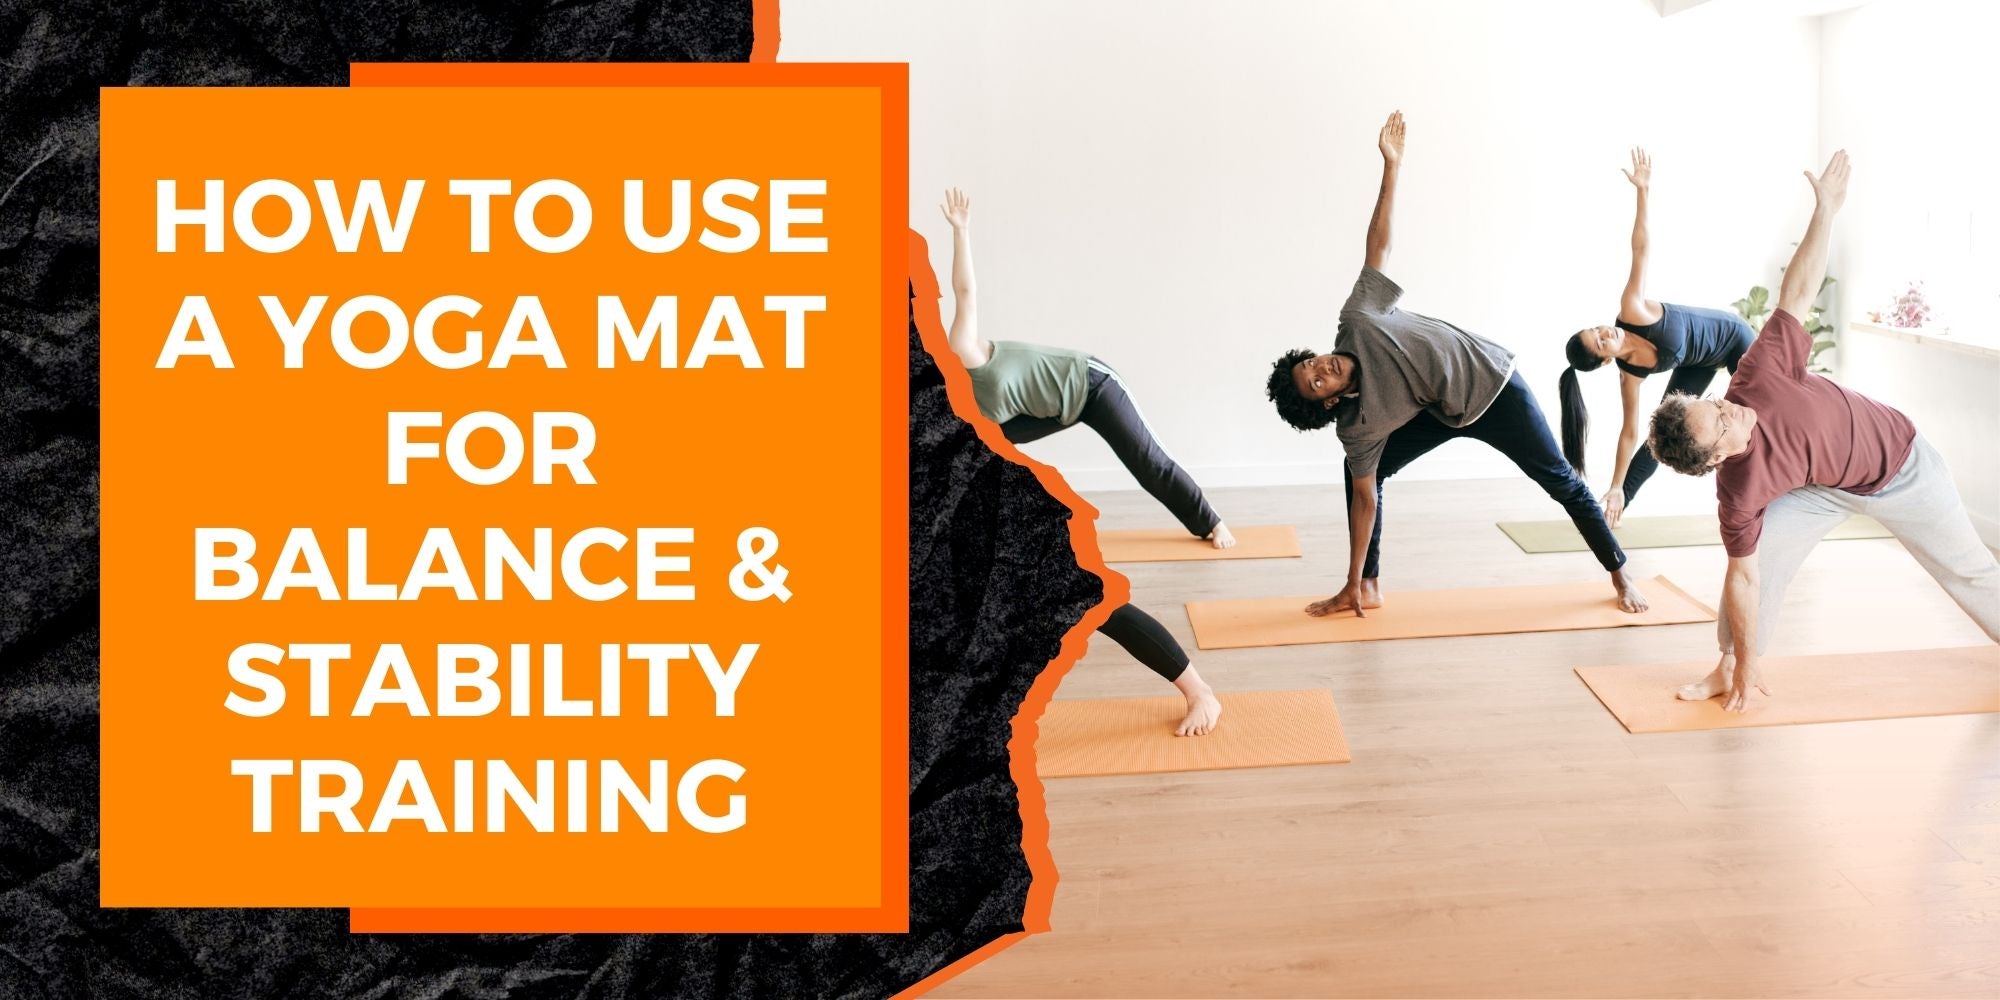 How to Use a Yoga Mat for Balance and Stability Training